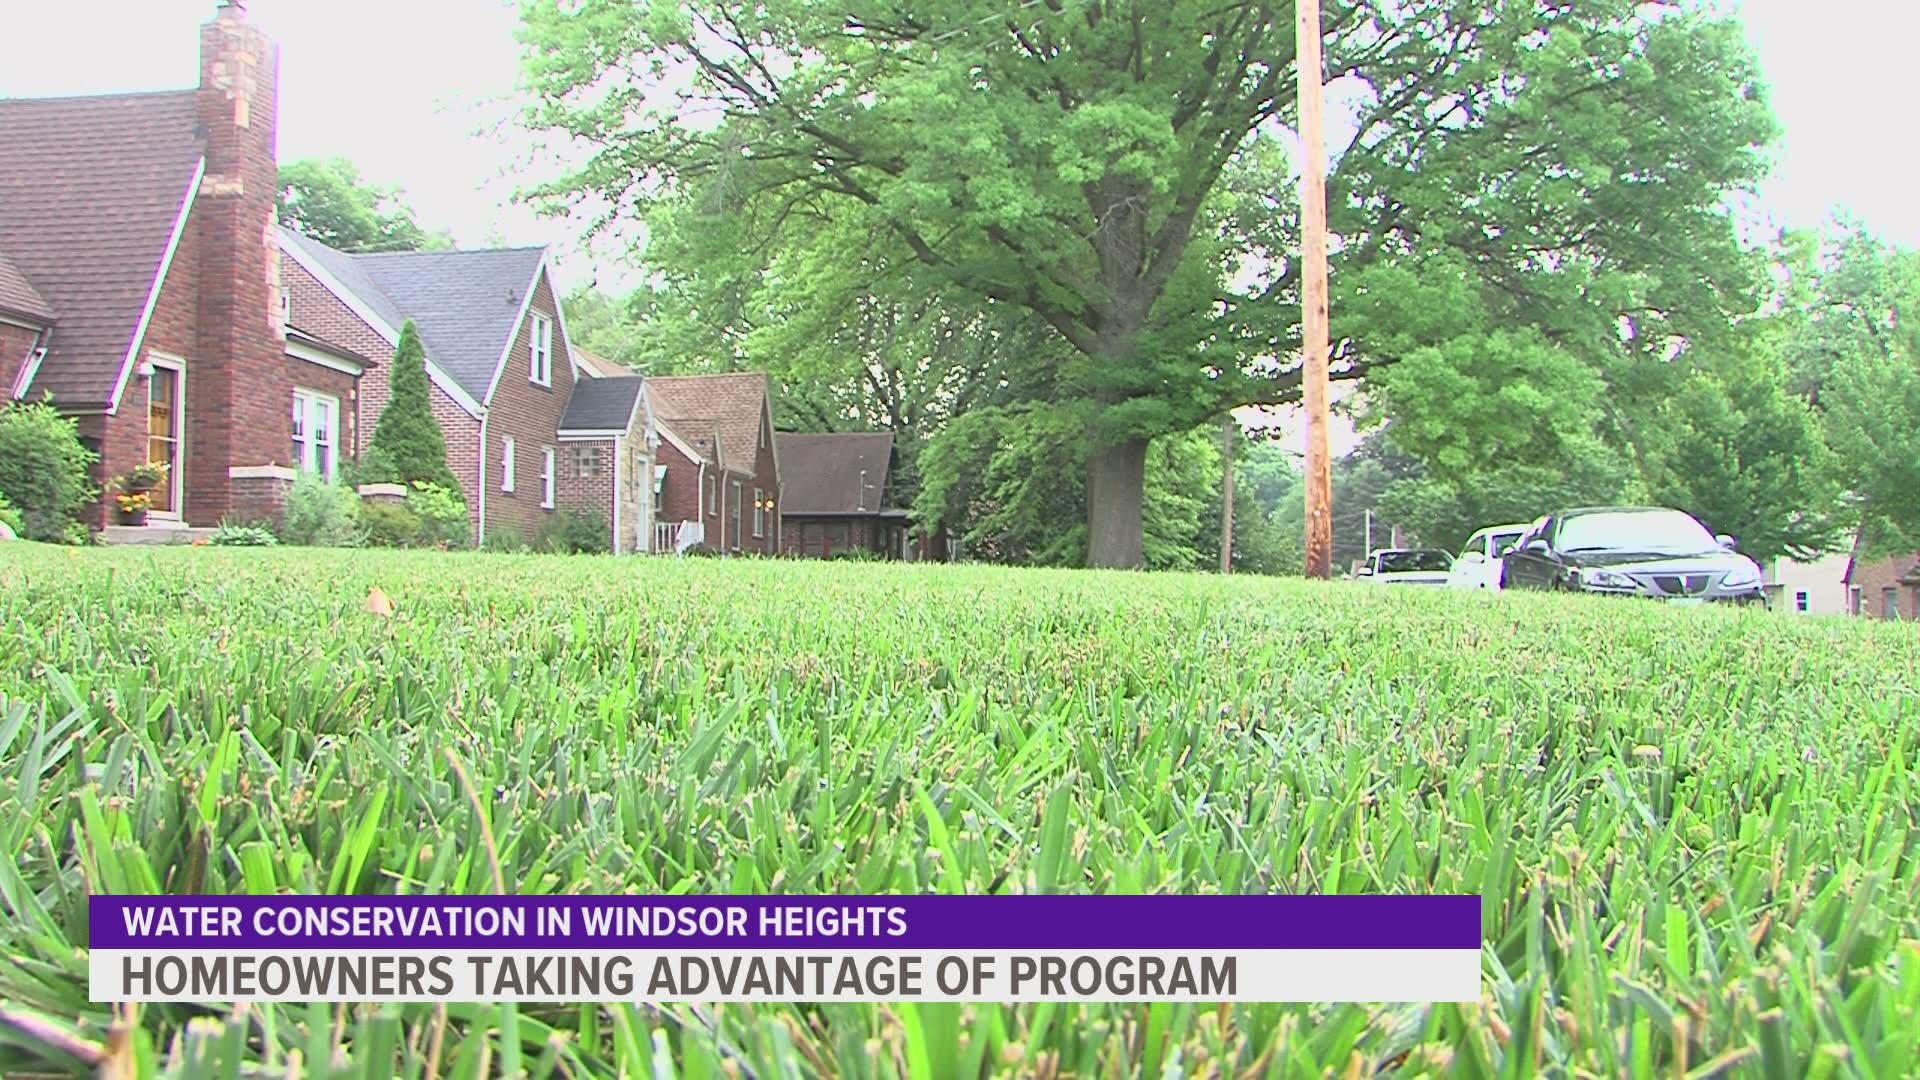 The city will match up to $1,000 for certain water conservation efforts completed by homeowners.